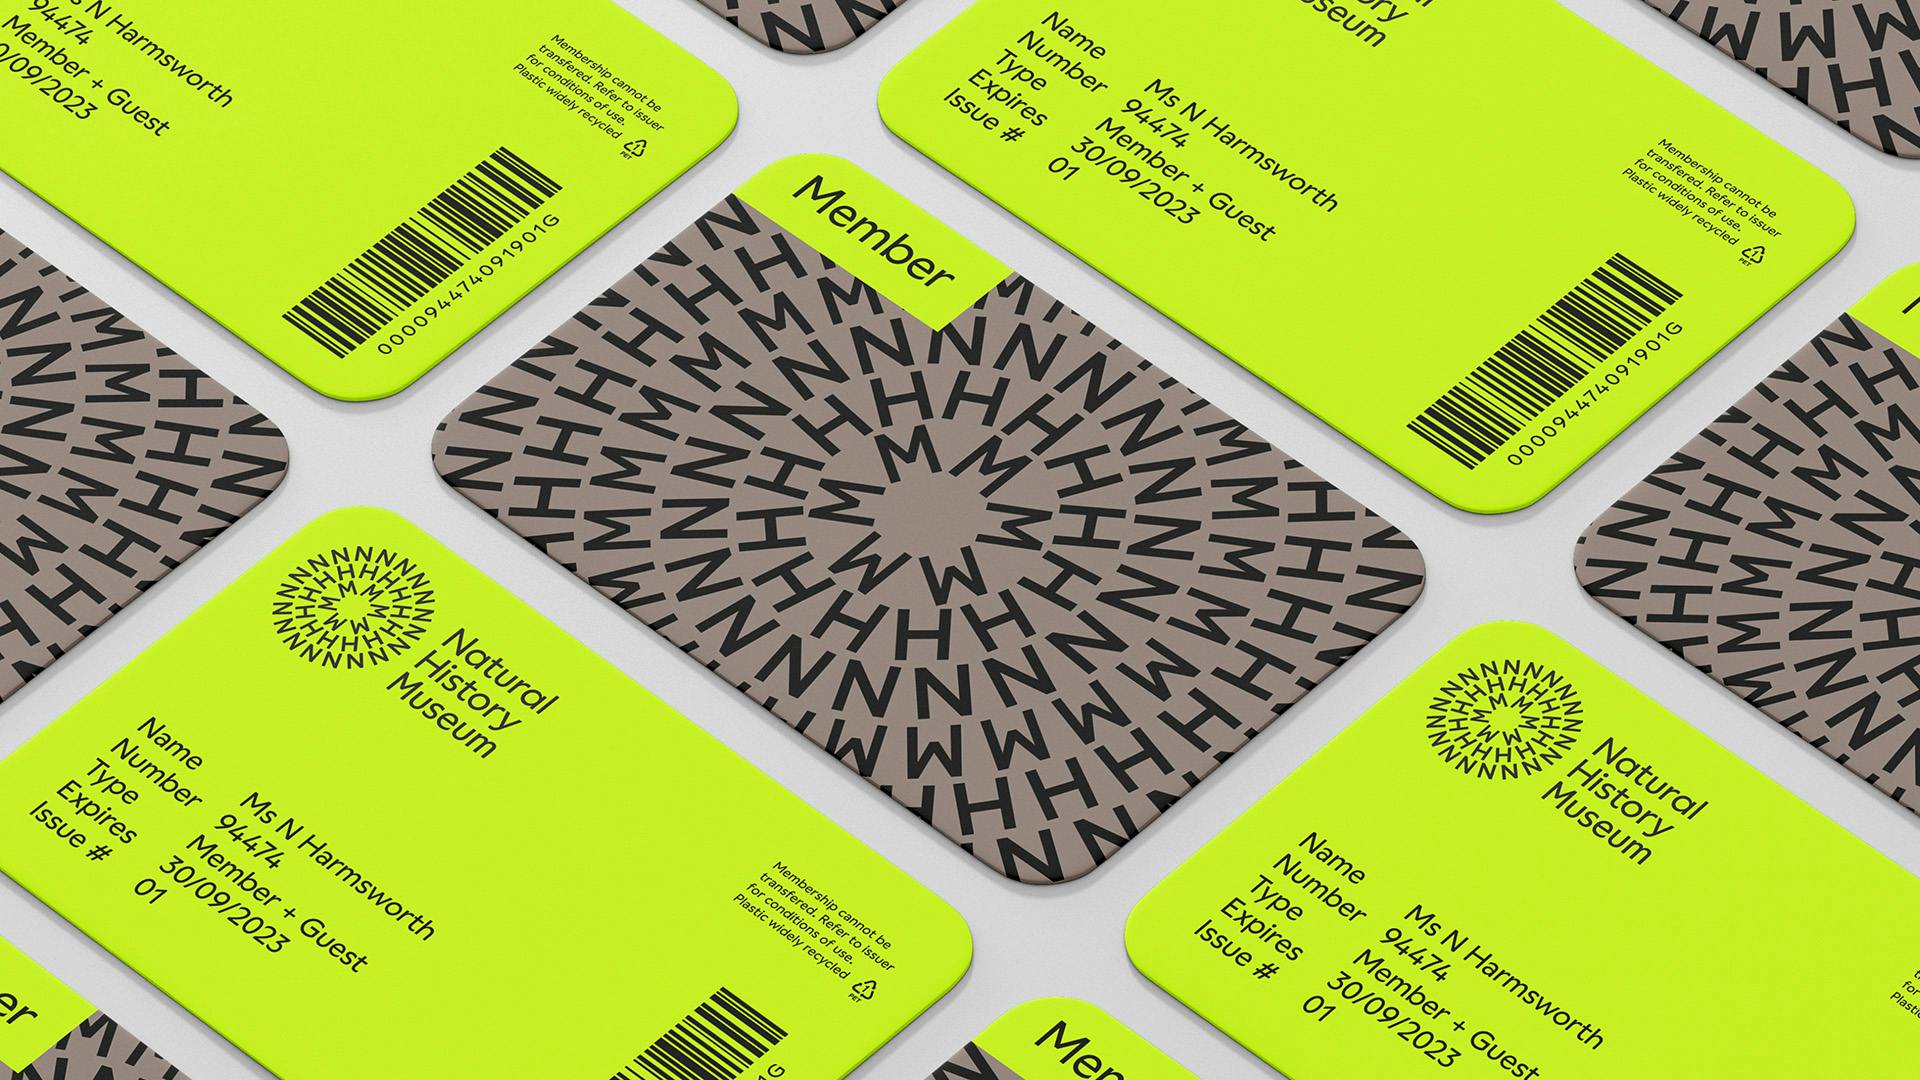 Image shows the new Natural History Museum branding on neon yellow member cards, and the reverse side of the cards, which show the initials 'NHM' arranged in concentric circles on a steel grey background